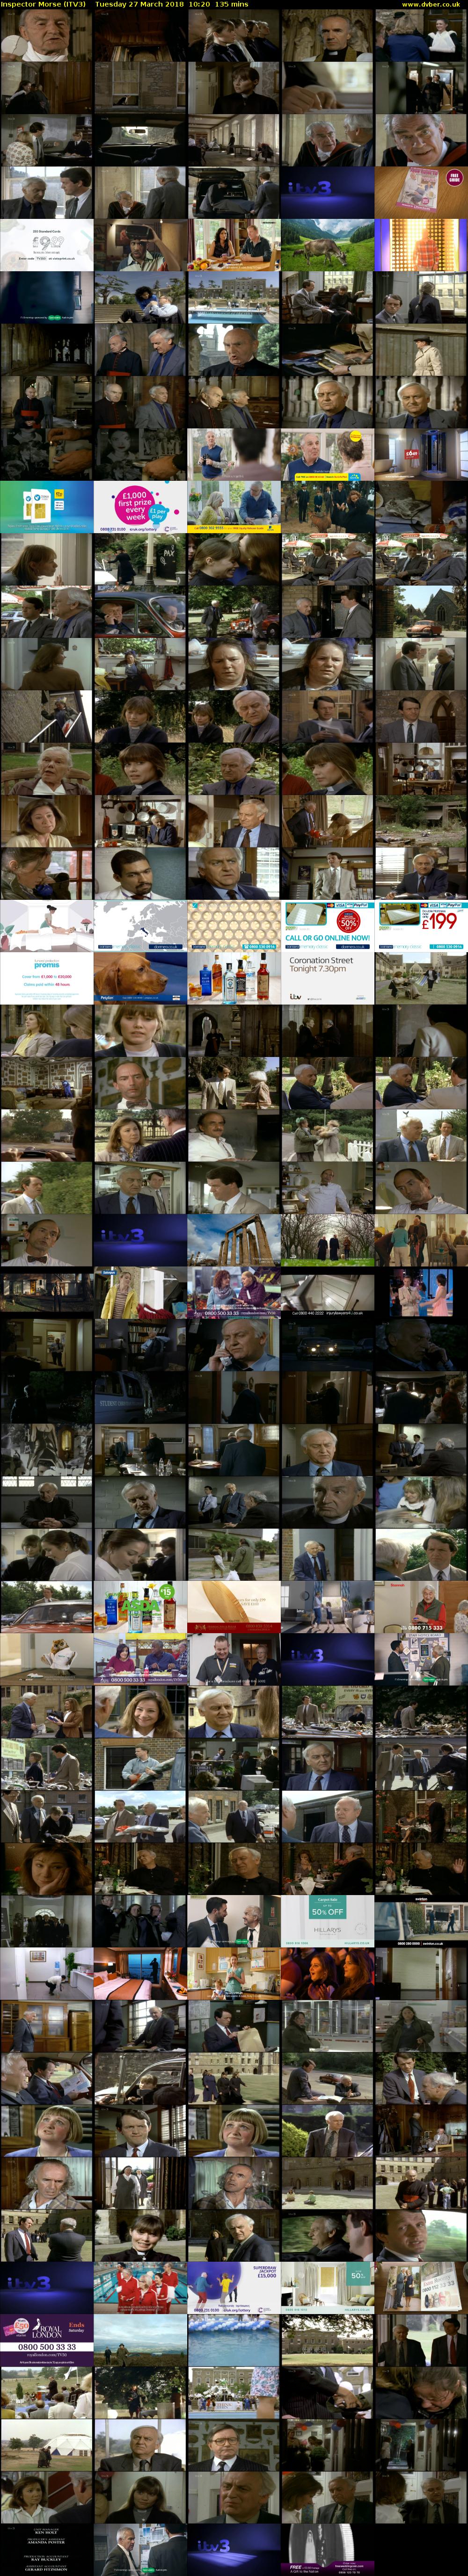 Inspector Morse (ITV3) Tuesday 27 March 2018 10:20 - 12:35